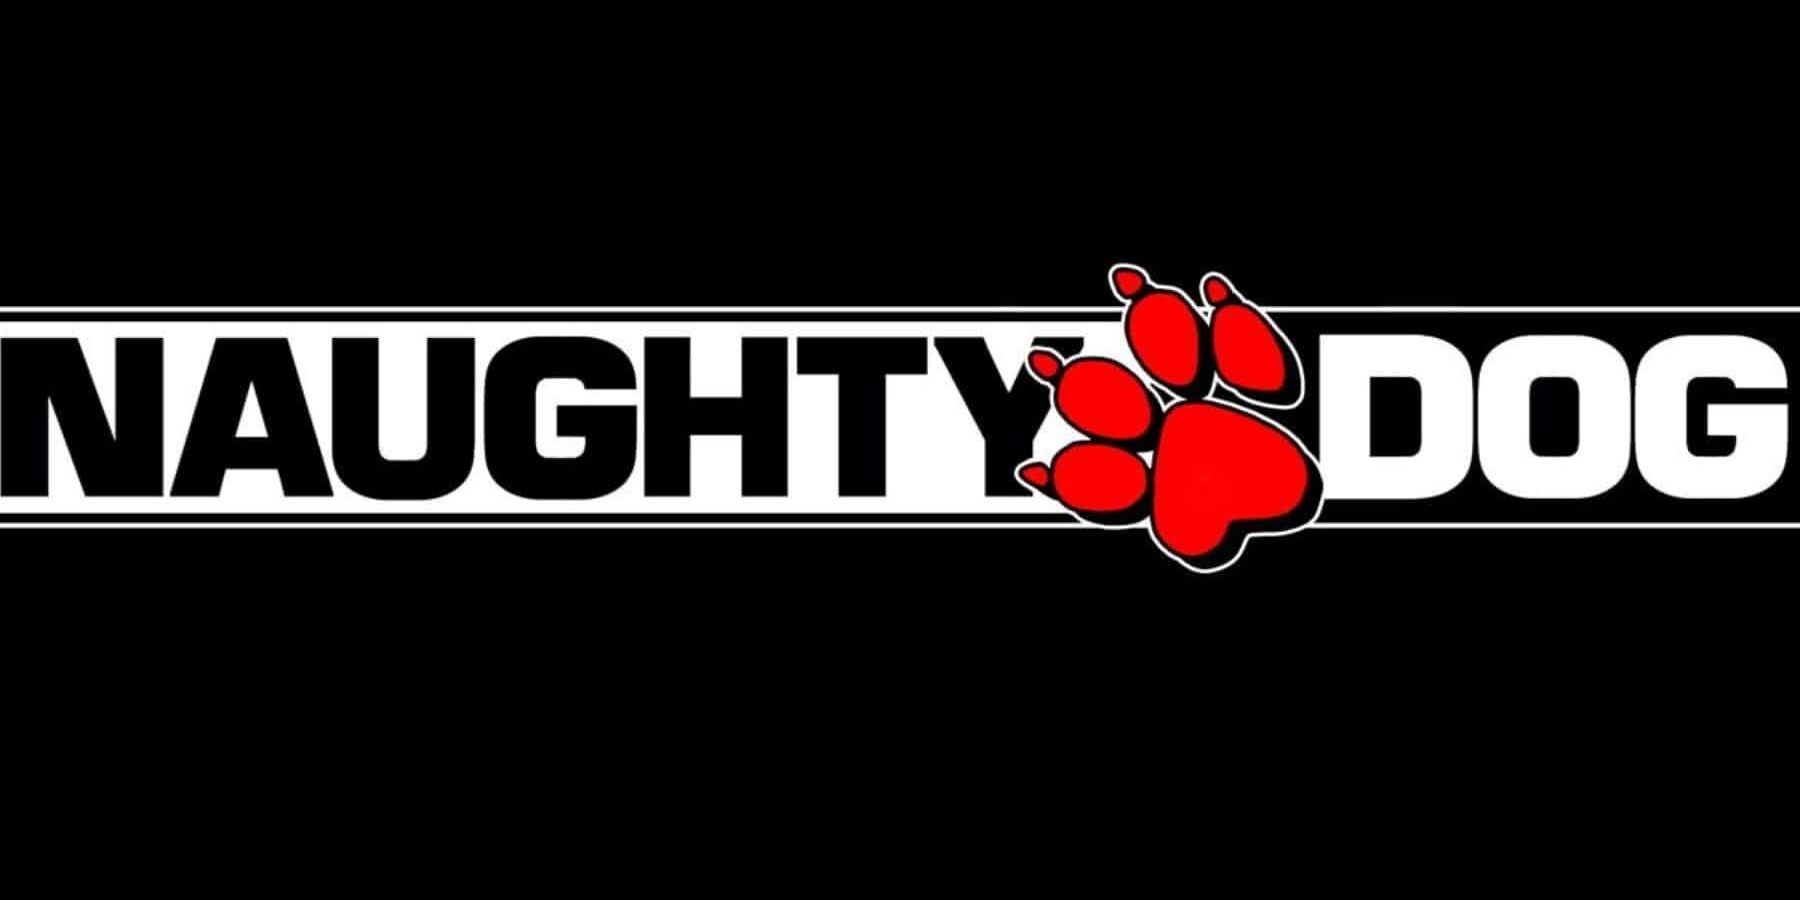 The naughty dog logo for Uncharted